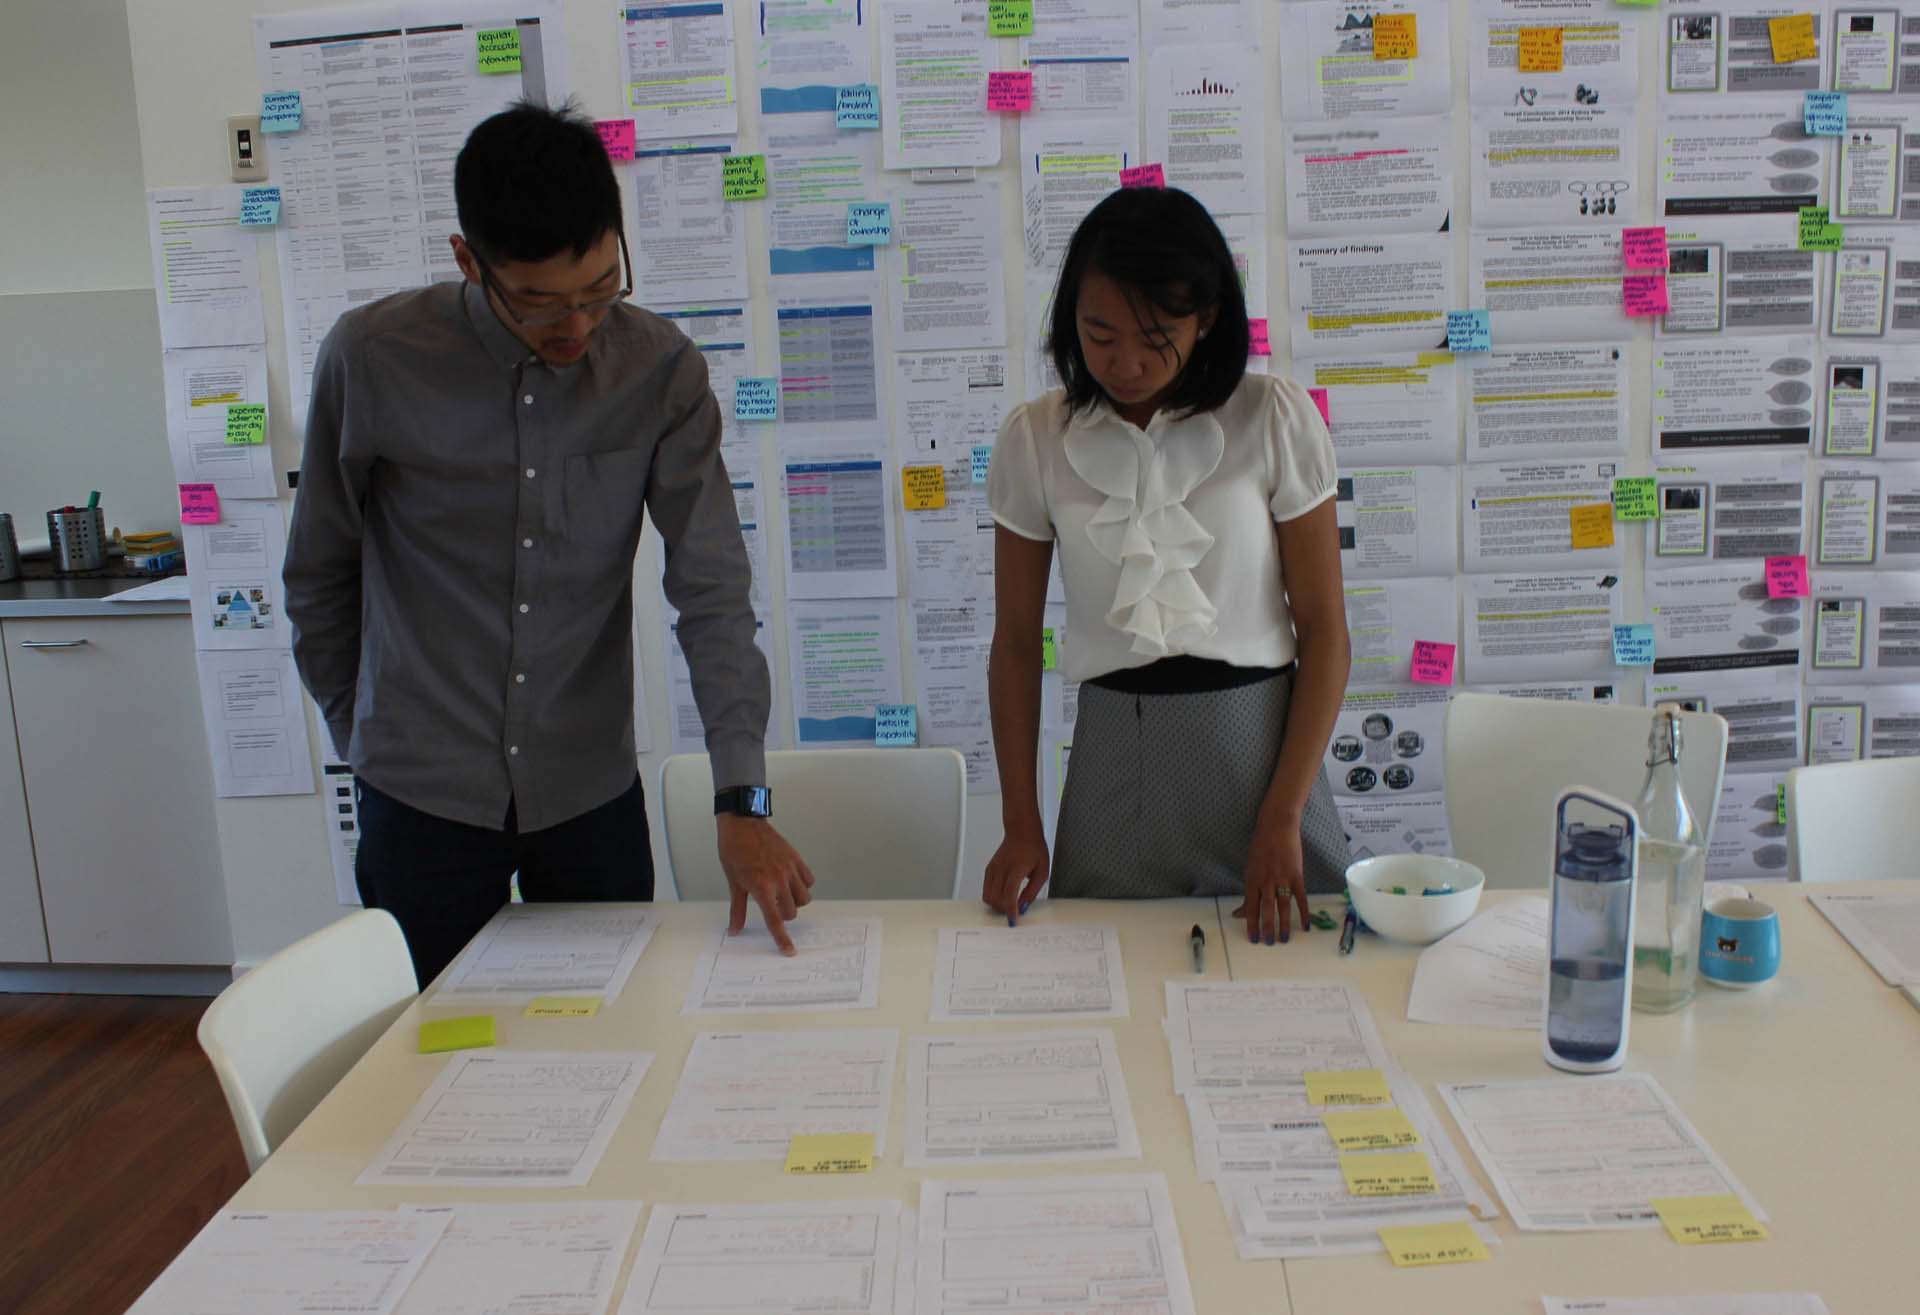 Two proto experience designers analysing research data